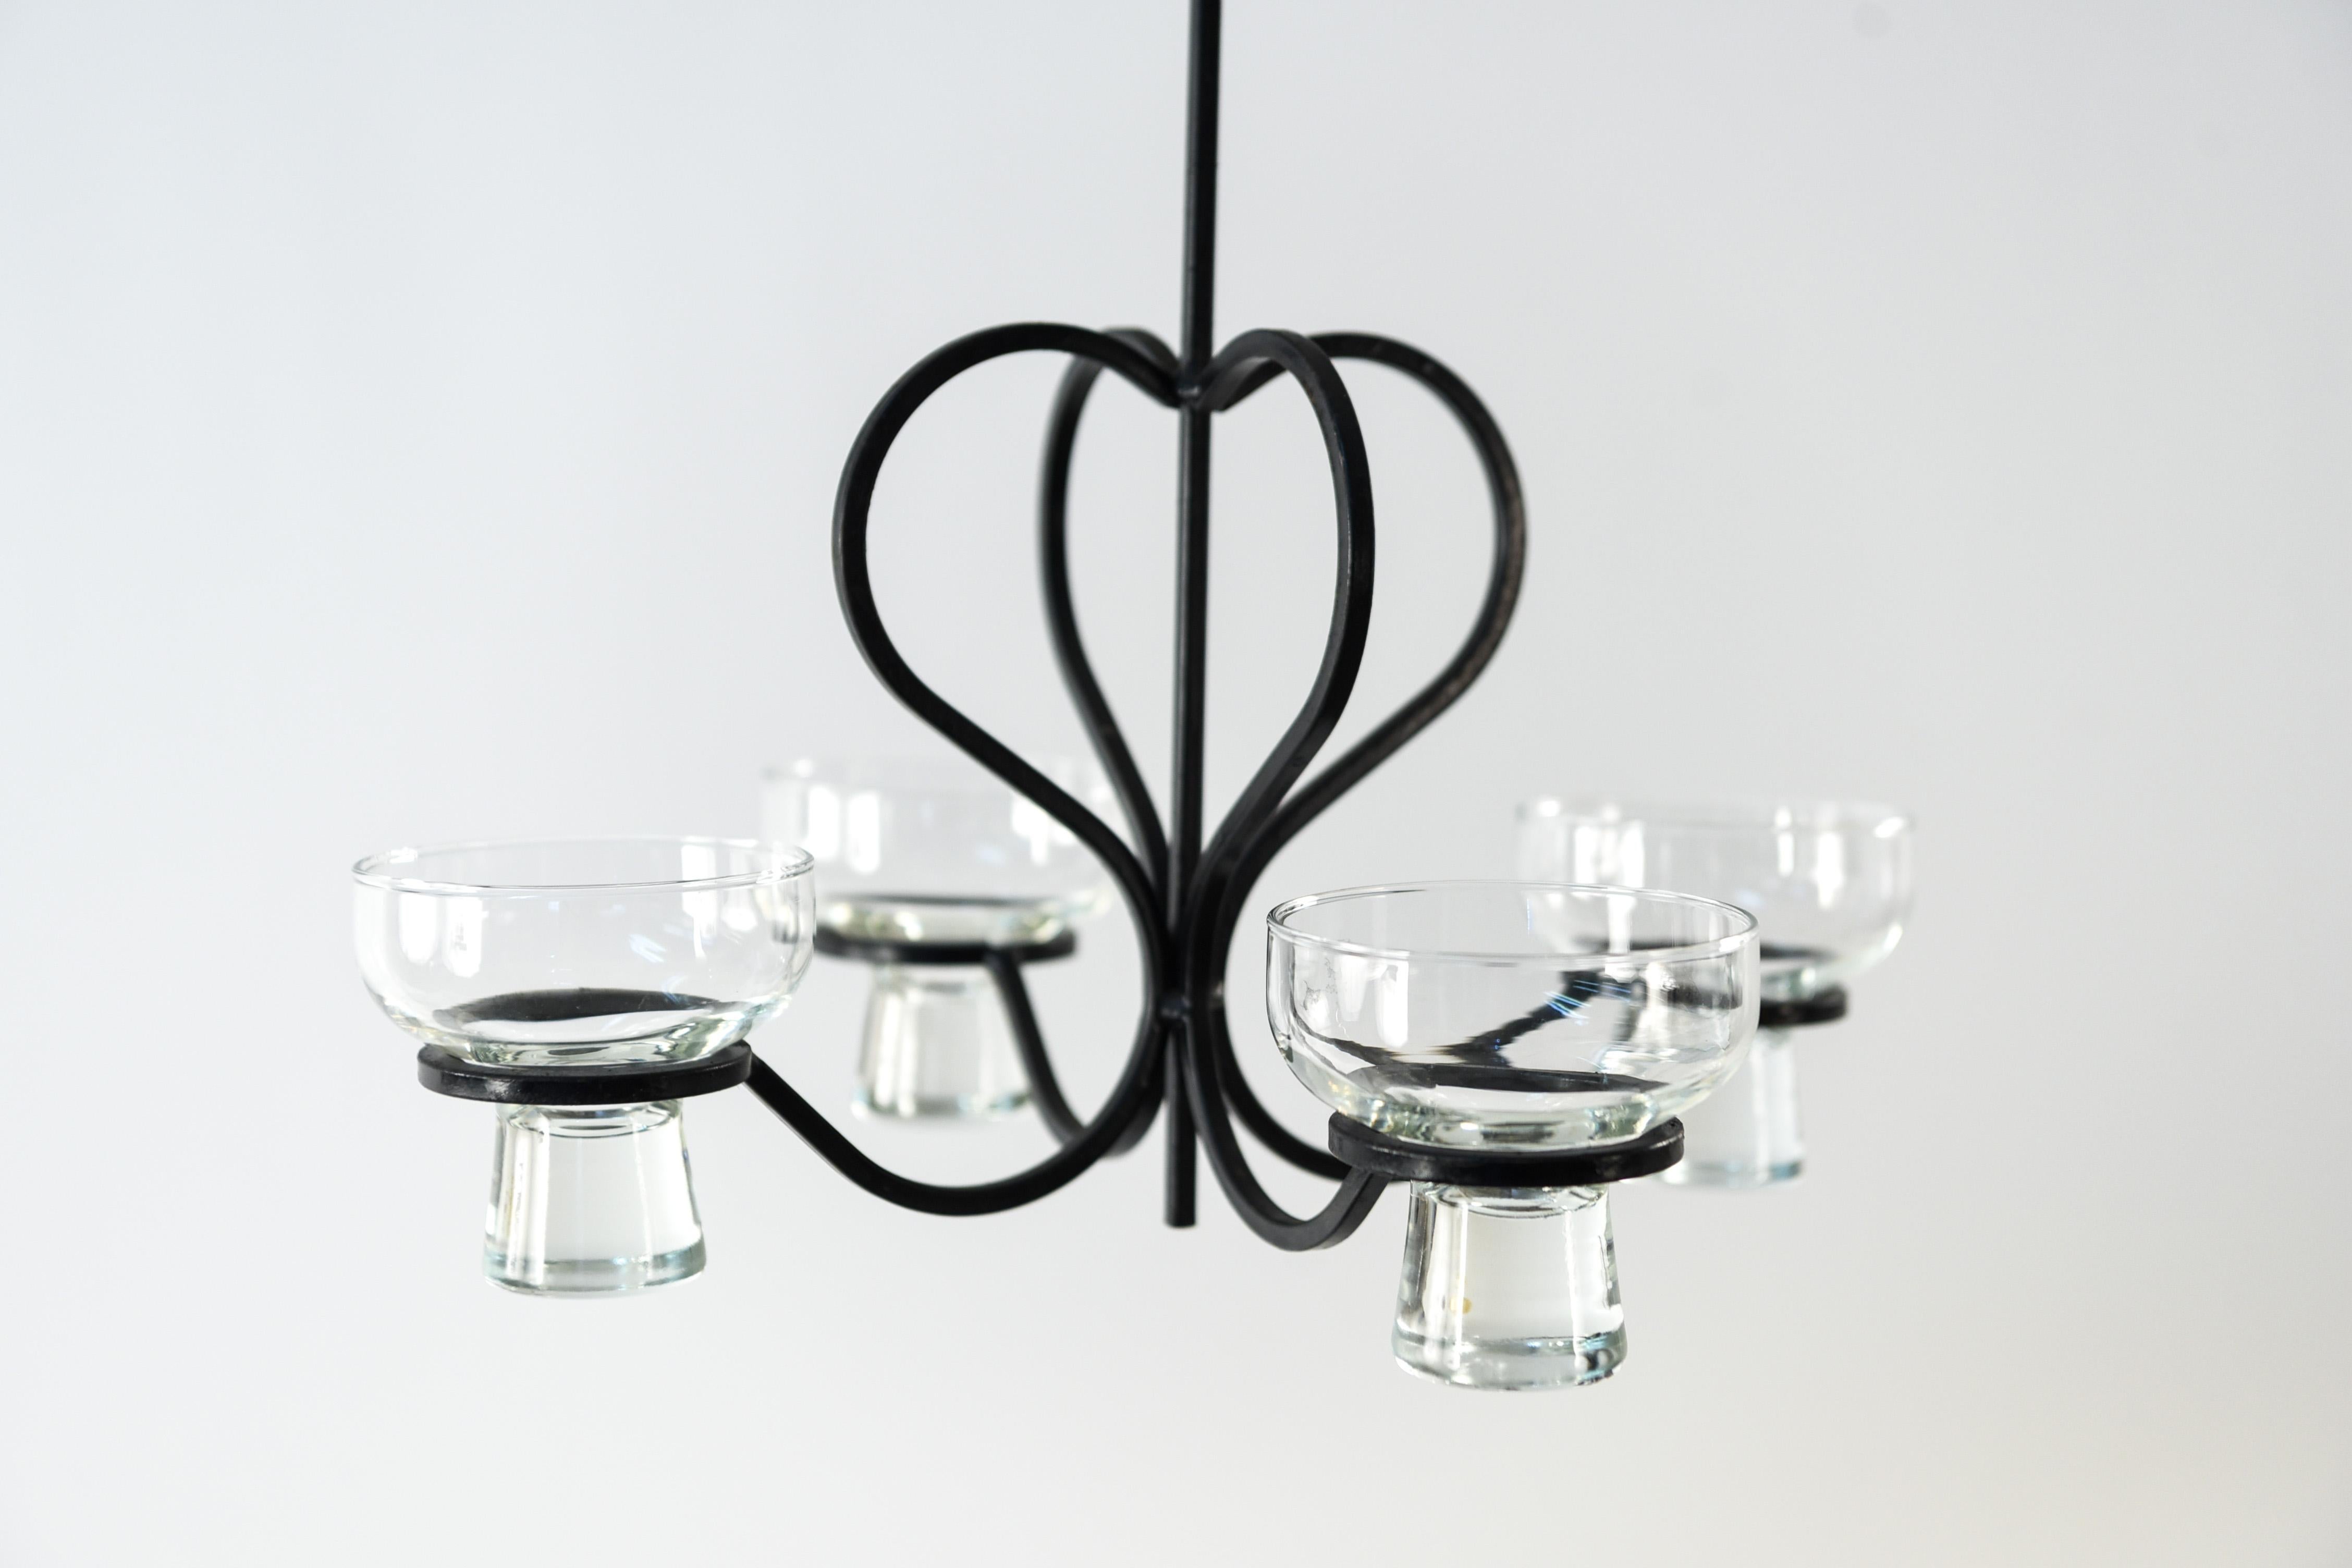 This Danish chandelier from the 1970s has a curvy steel frame with glass inserts to hold candles. This piece has a simple charm to it with its lovely lines and details.